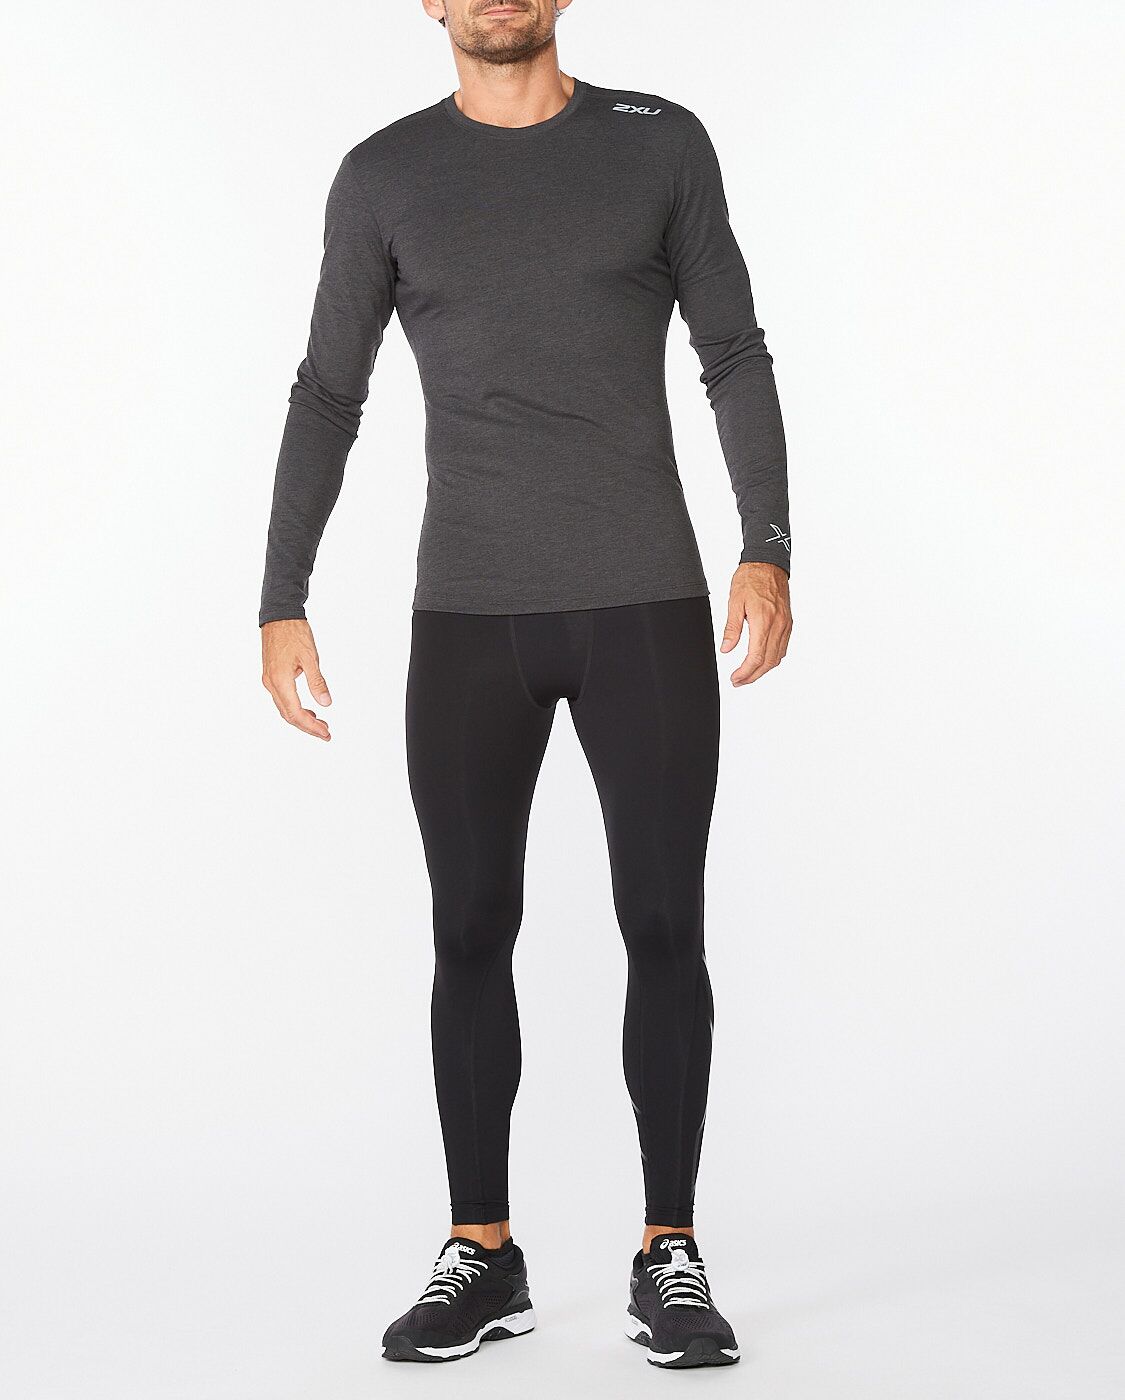 2XU South Africa - Mens Ignition Base Layer L/S - Black Marle/Silver Reflective